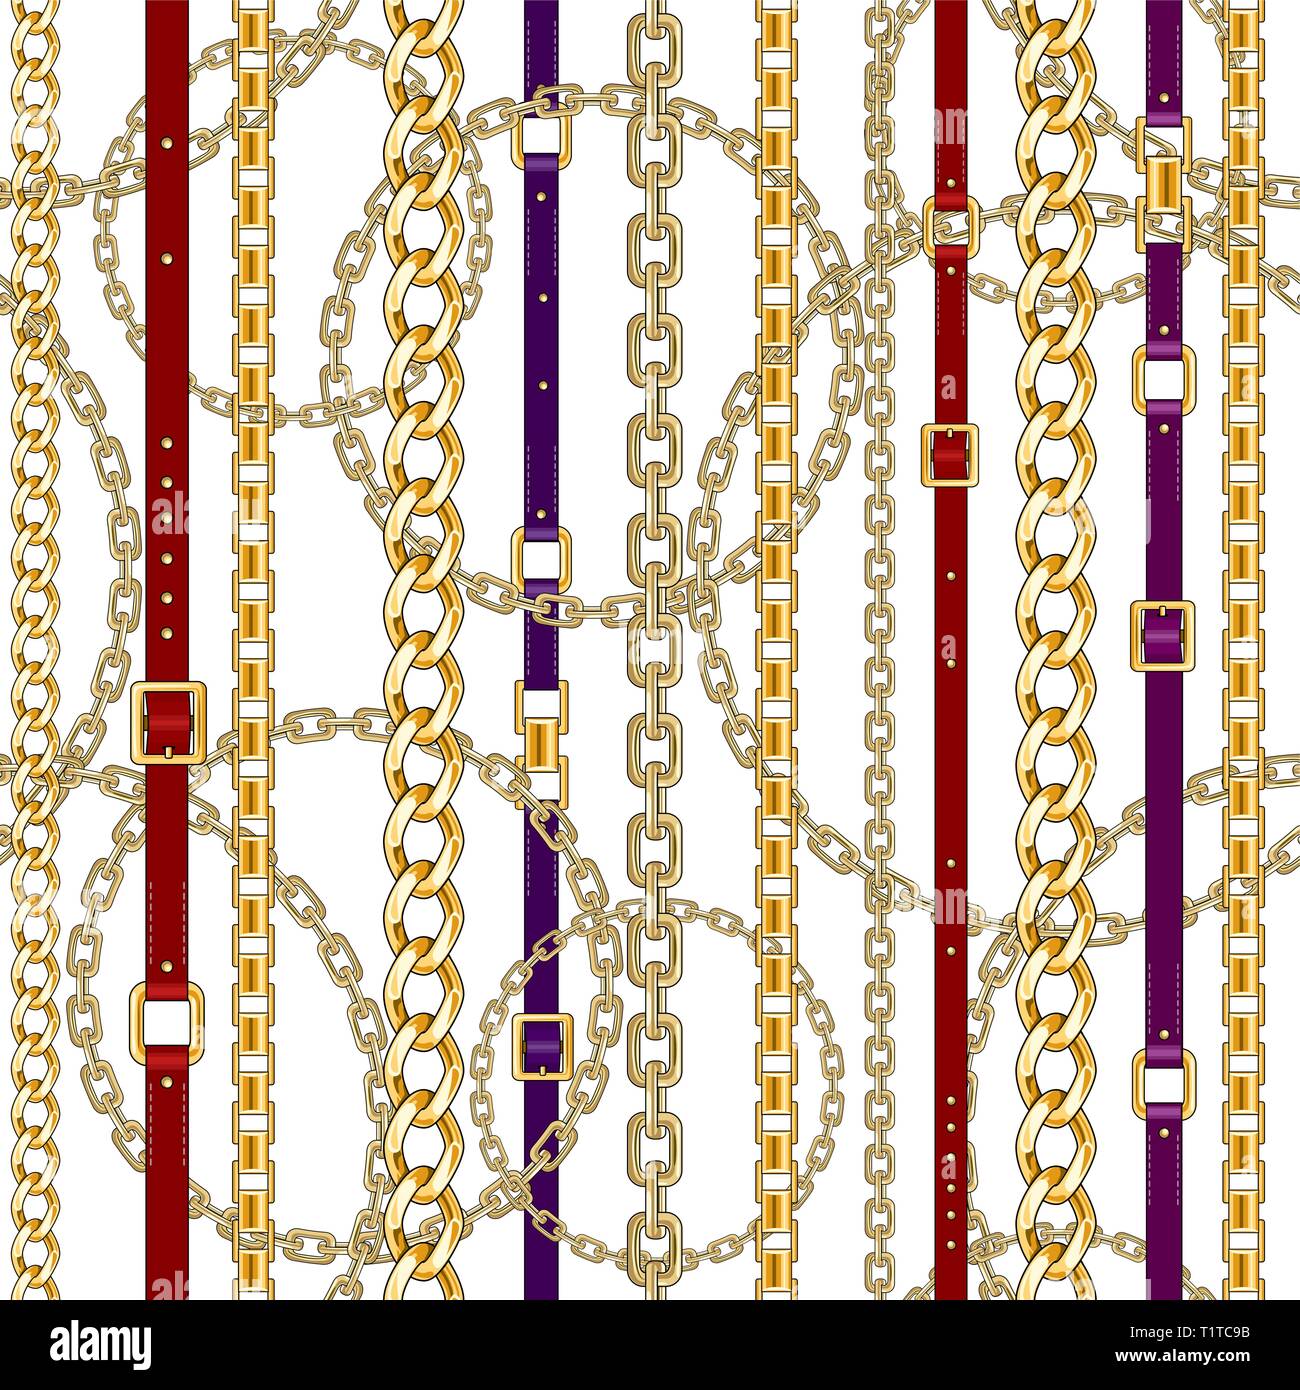 Seamless pattern with gold chains and belts on white background for fabric. Trendy repeating print. Stock Vector